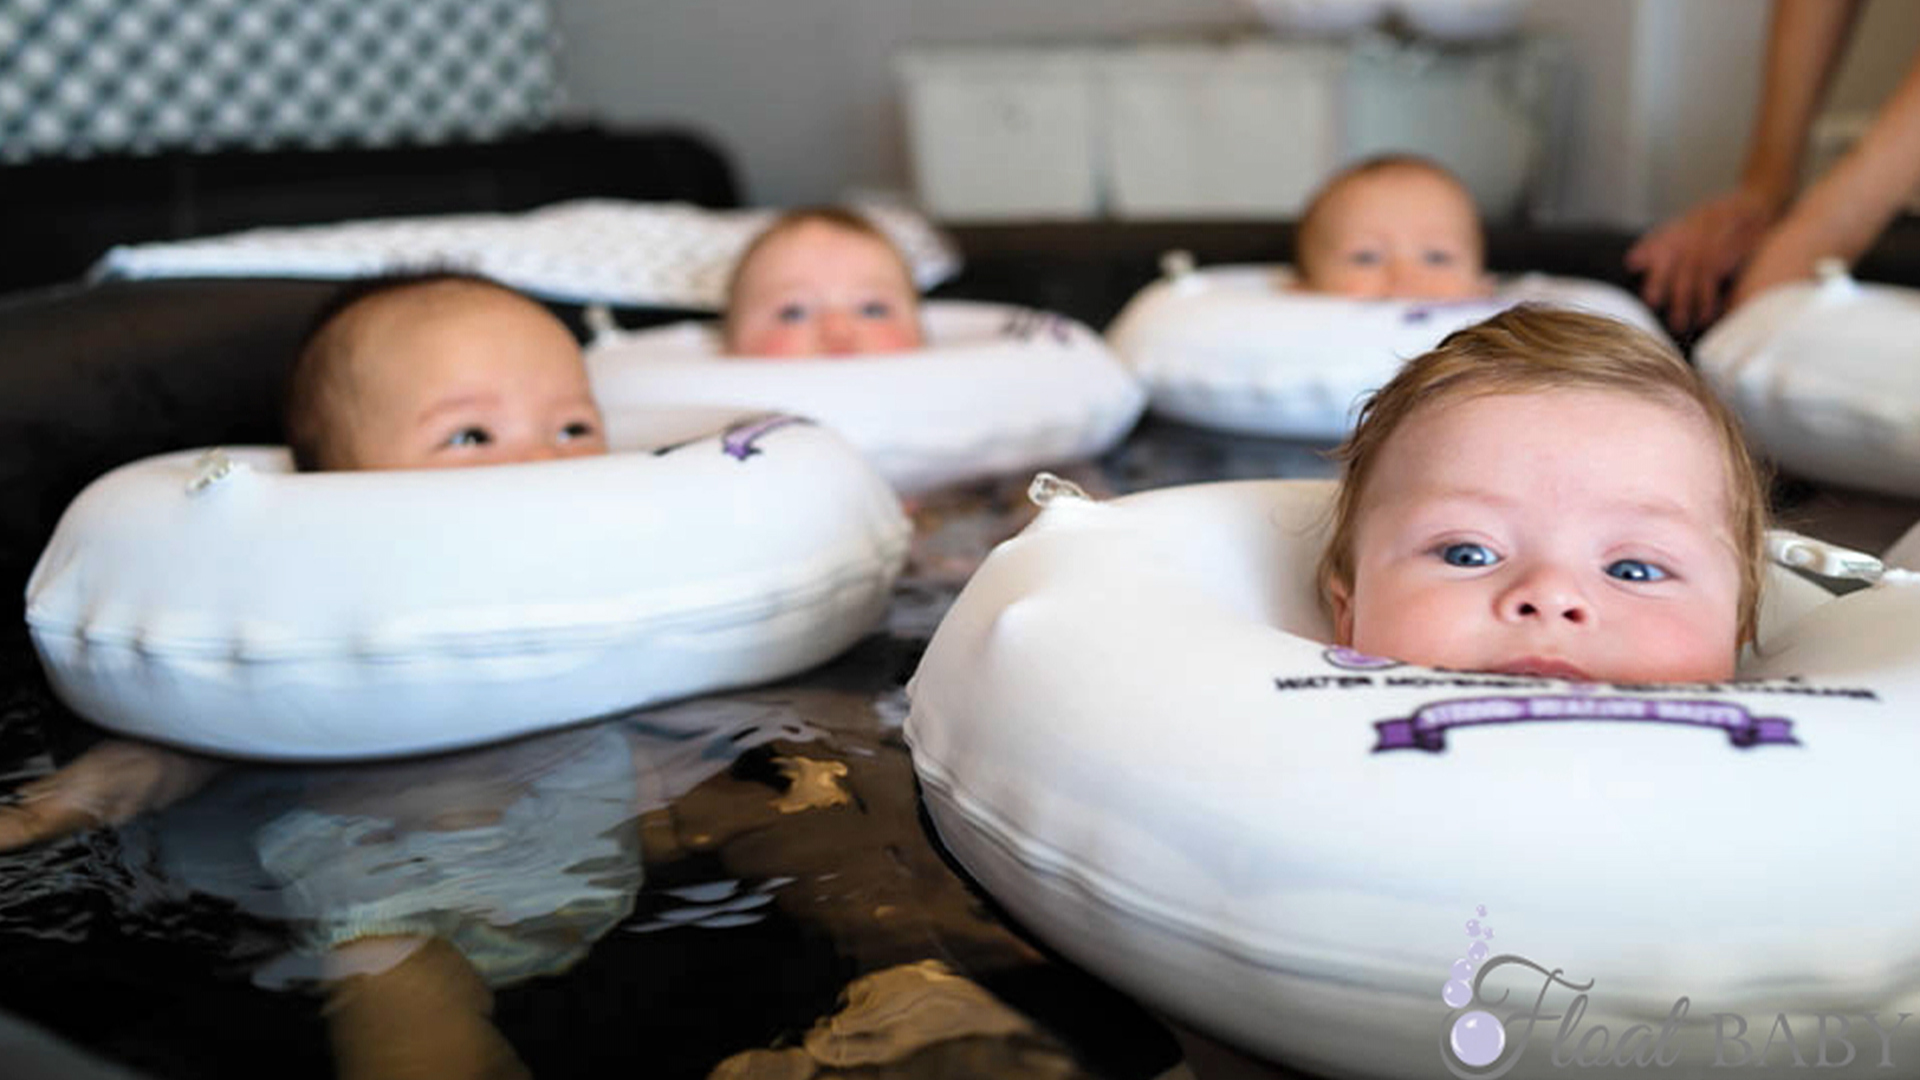 Baby spa takes the stress out of being an infant with floating, massage ...